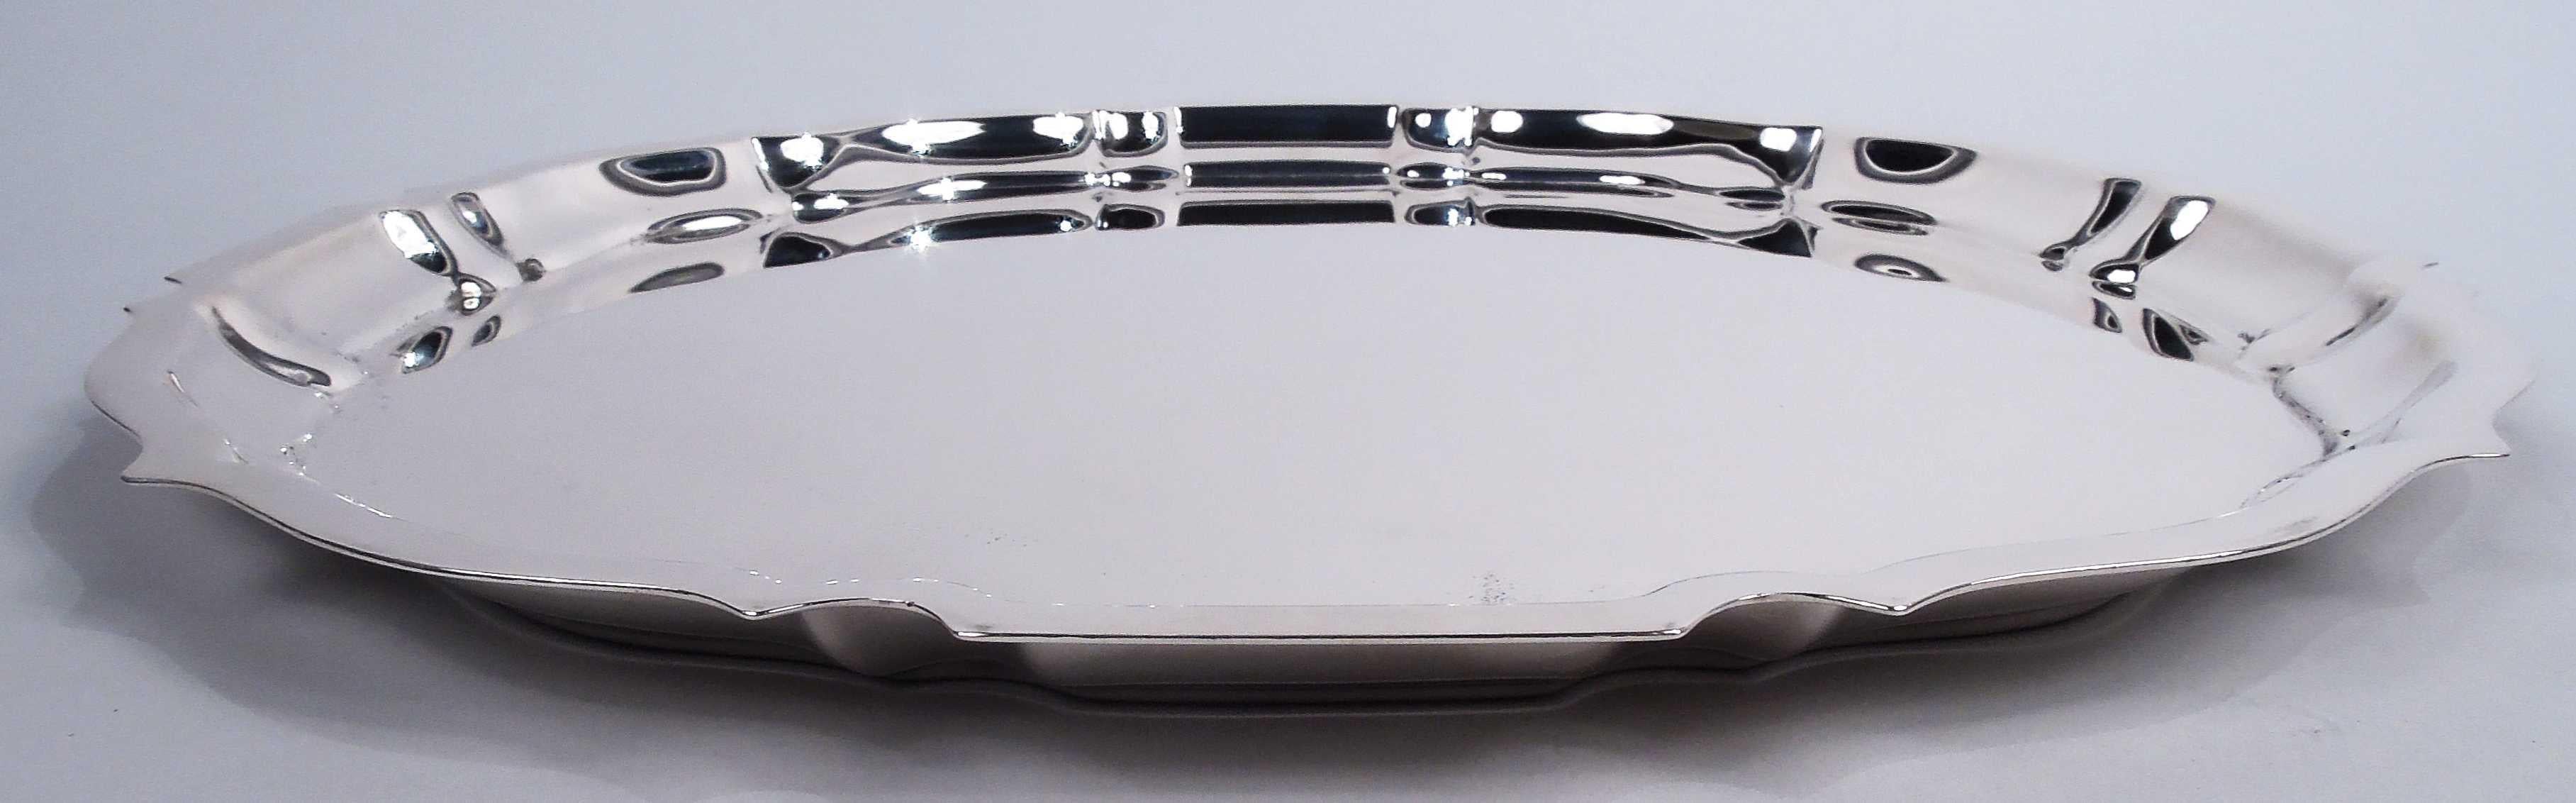 Chippendale sterling silver tray. Made by Gorham in Providence in 1943. Round with flat ogee piecrust rim. Traditional with nice heft. Fully marked including maker’s stamp, date code, pattern name, and no. 42612. Weight: 25.4 troy ounces. 